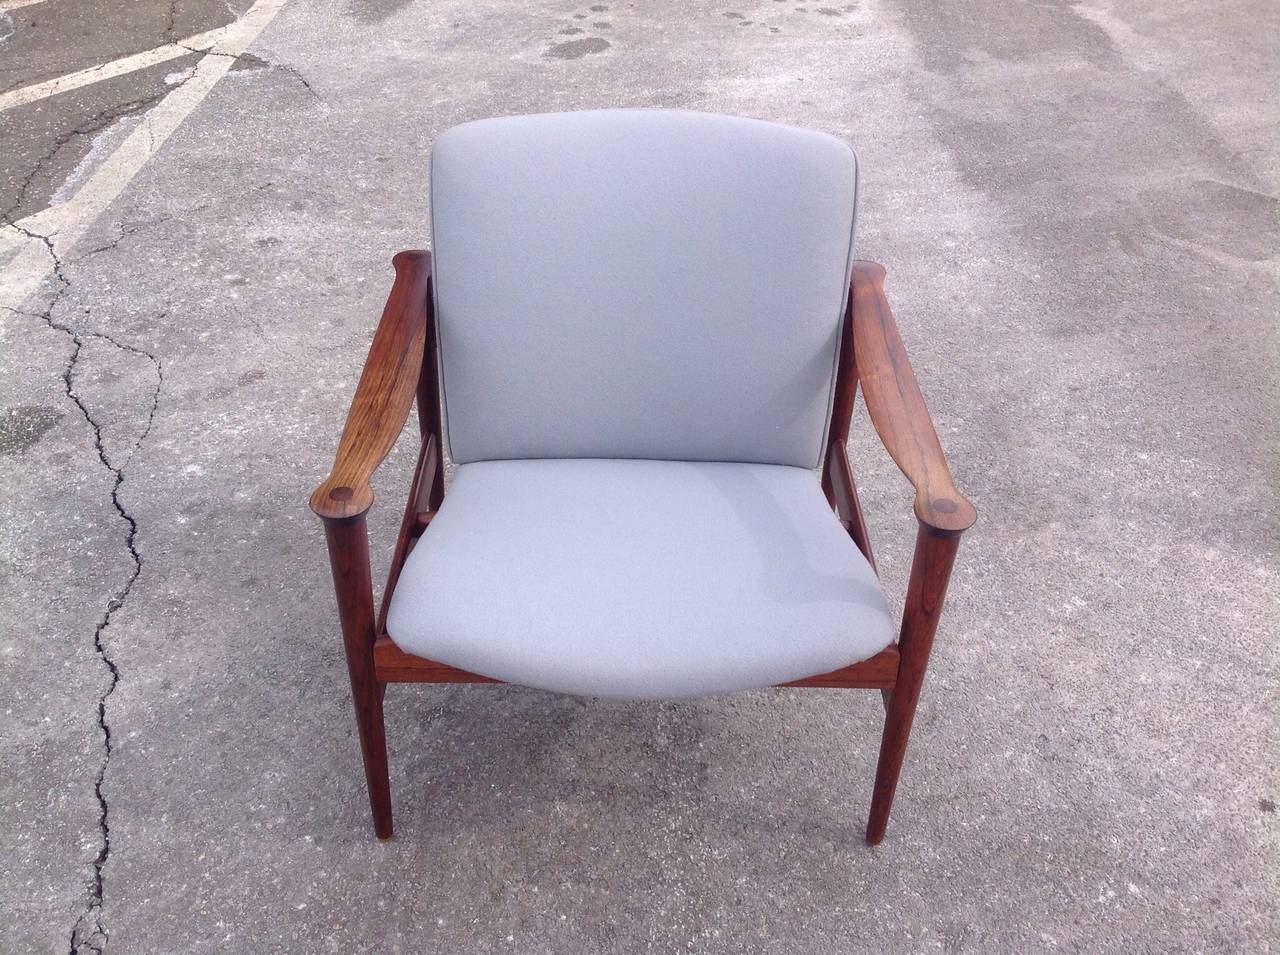 A beautiful and hard to find solid rosewood armchair designed by Peter Hvidt for Frederick Kayser, circa 1960.
This armchair was just re-upholstered.